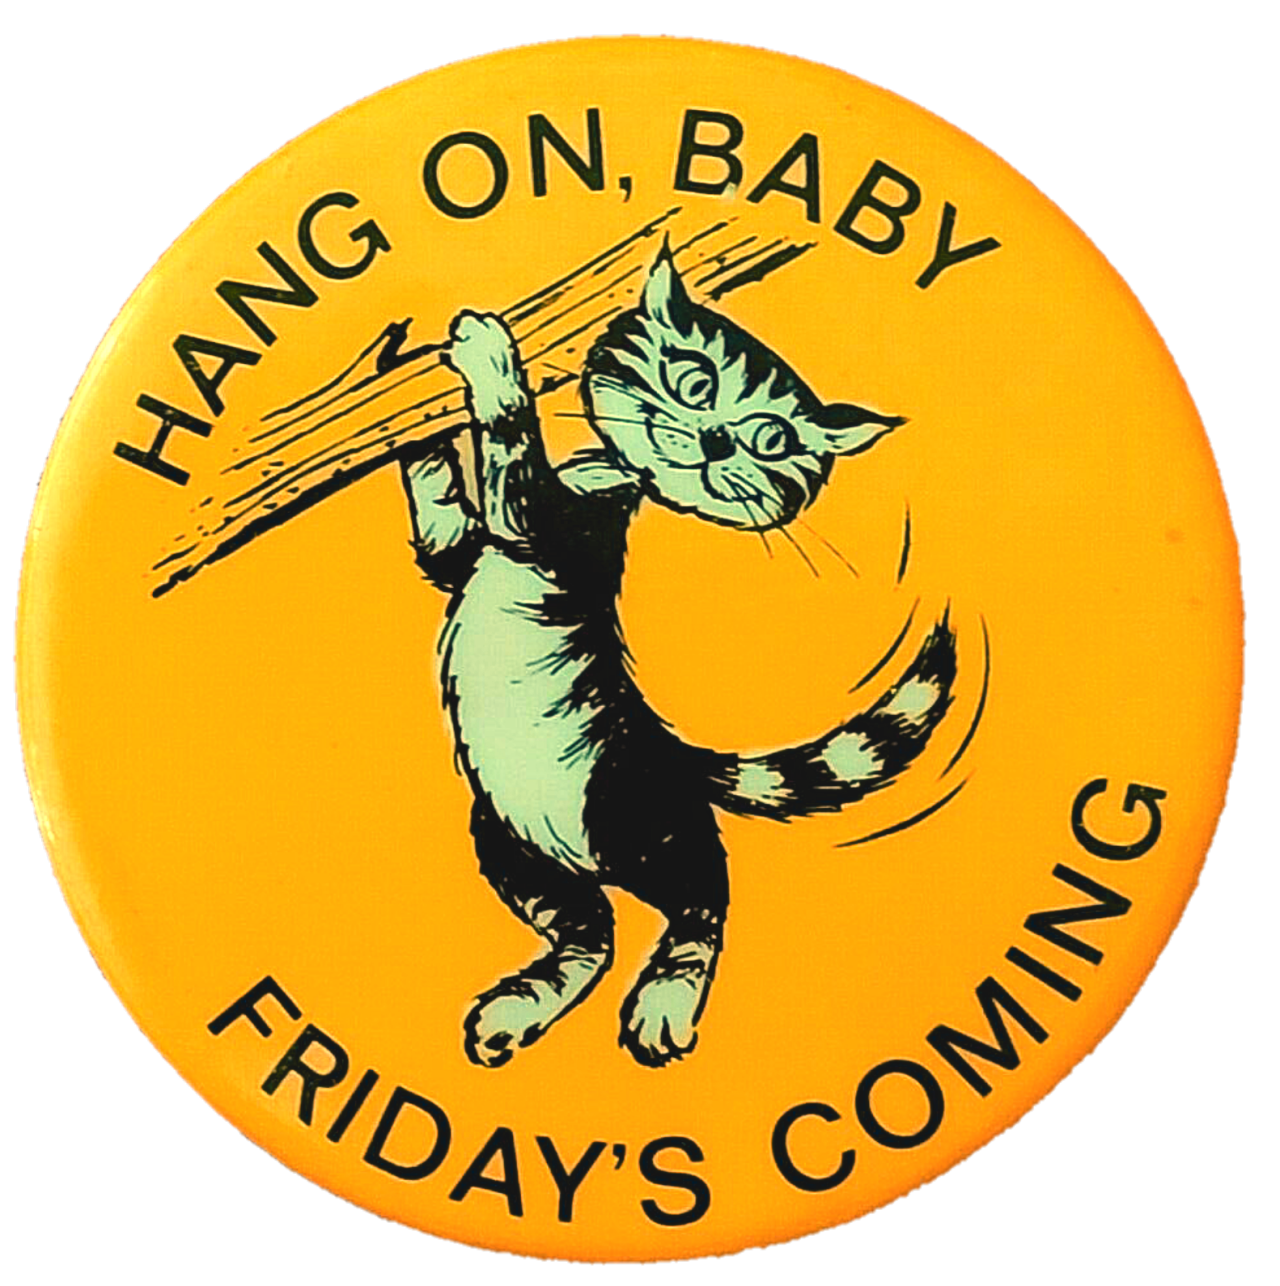 Hang on, baby Friday's coming